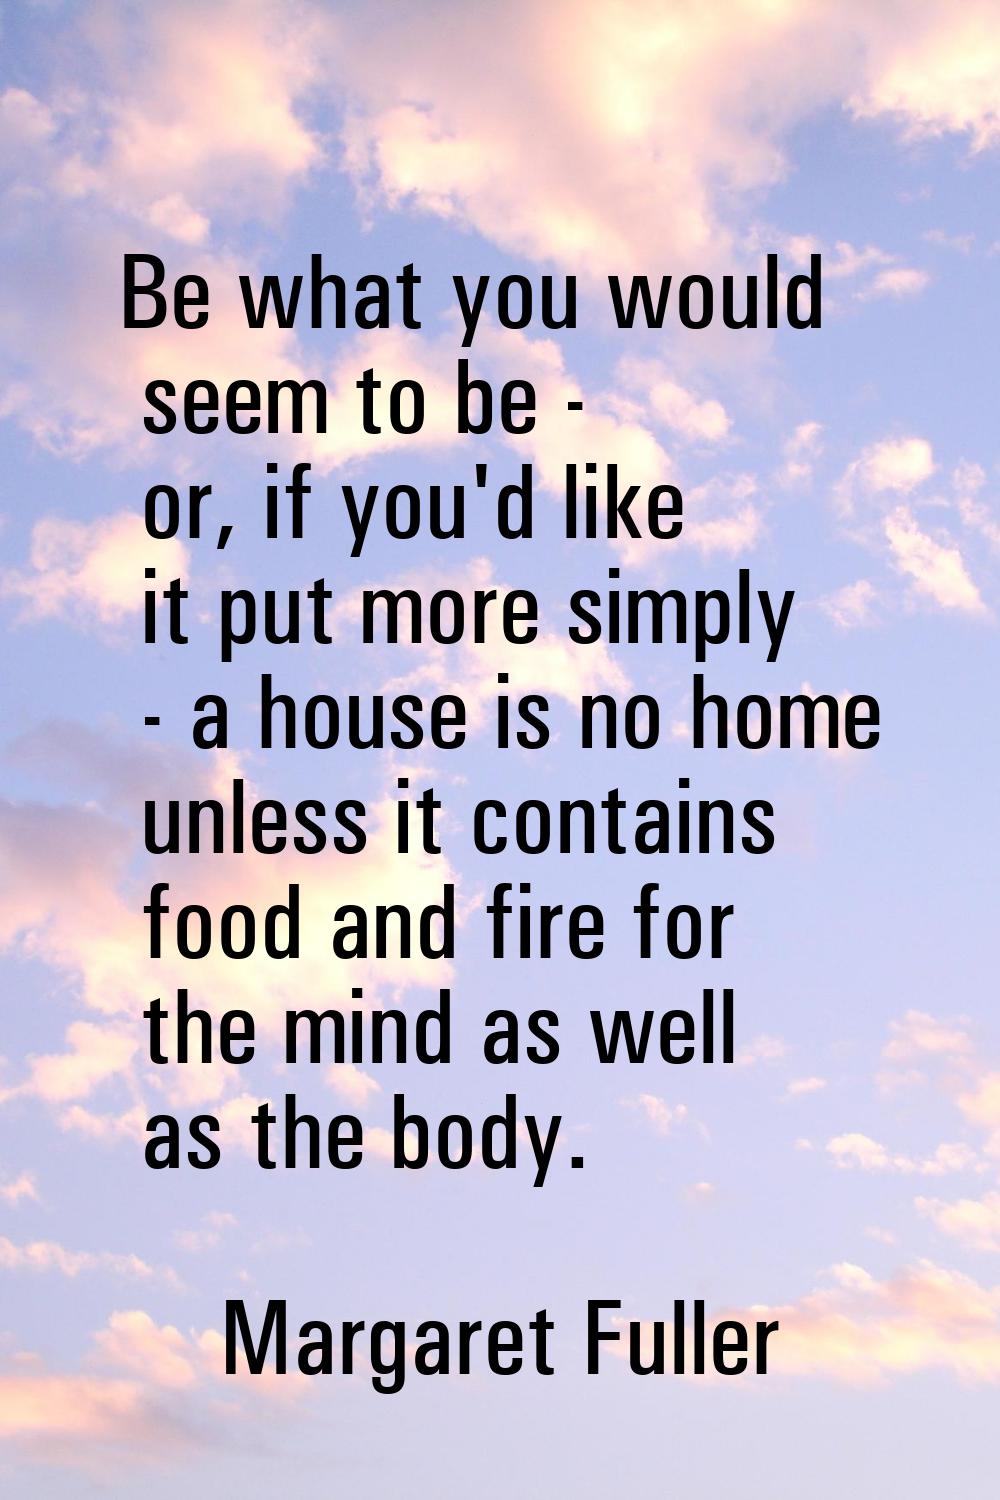 Be what you would seem to be - or, if you'd like it put more simply - a house is no home unless it 